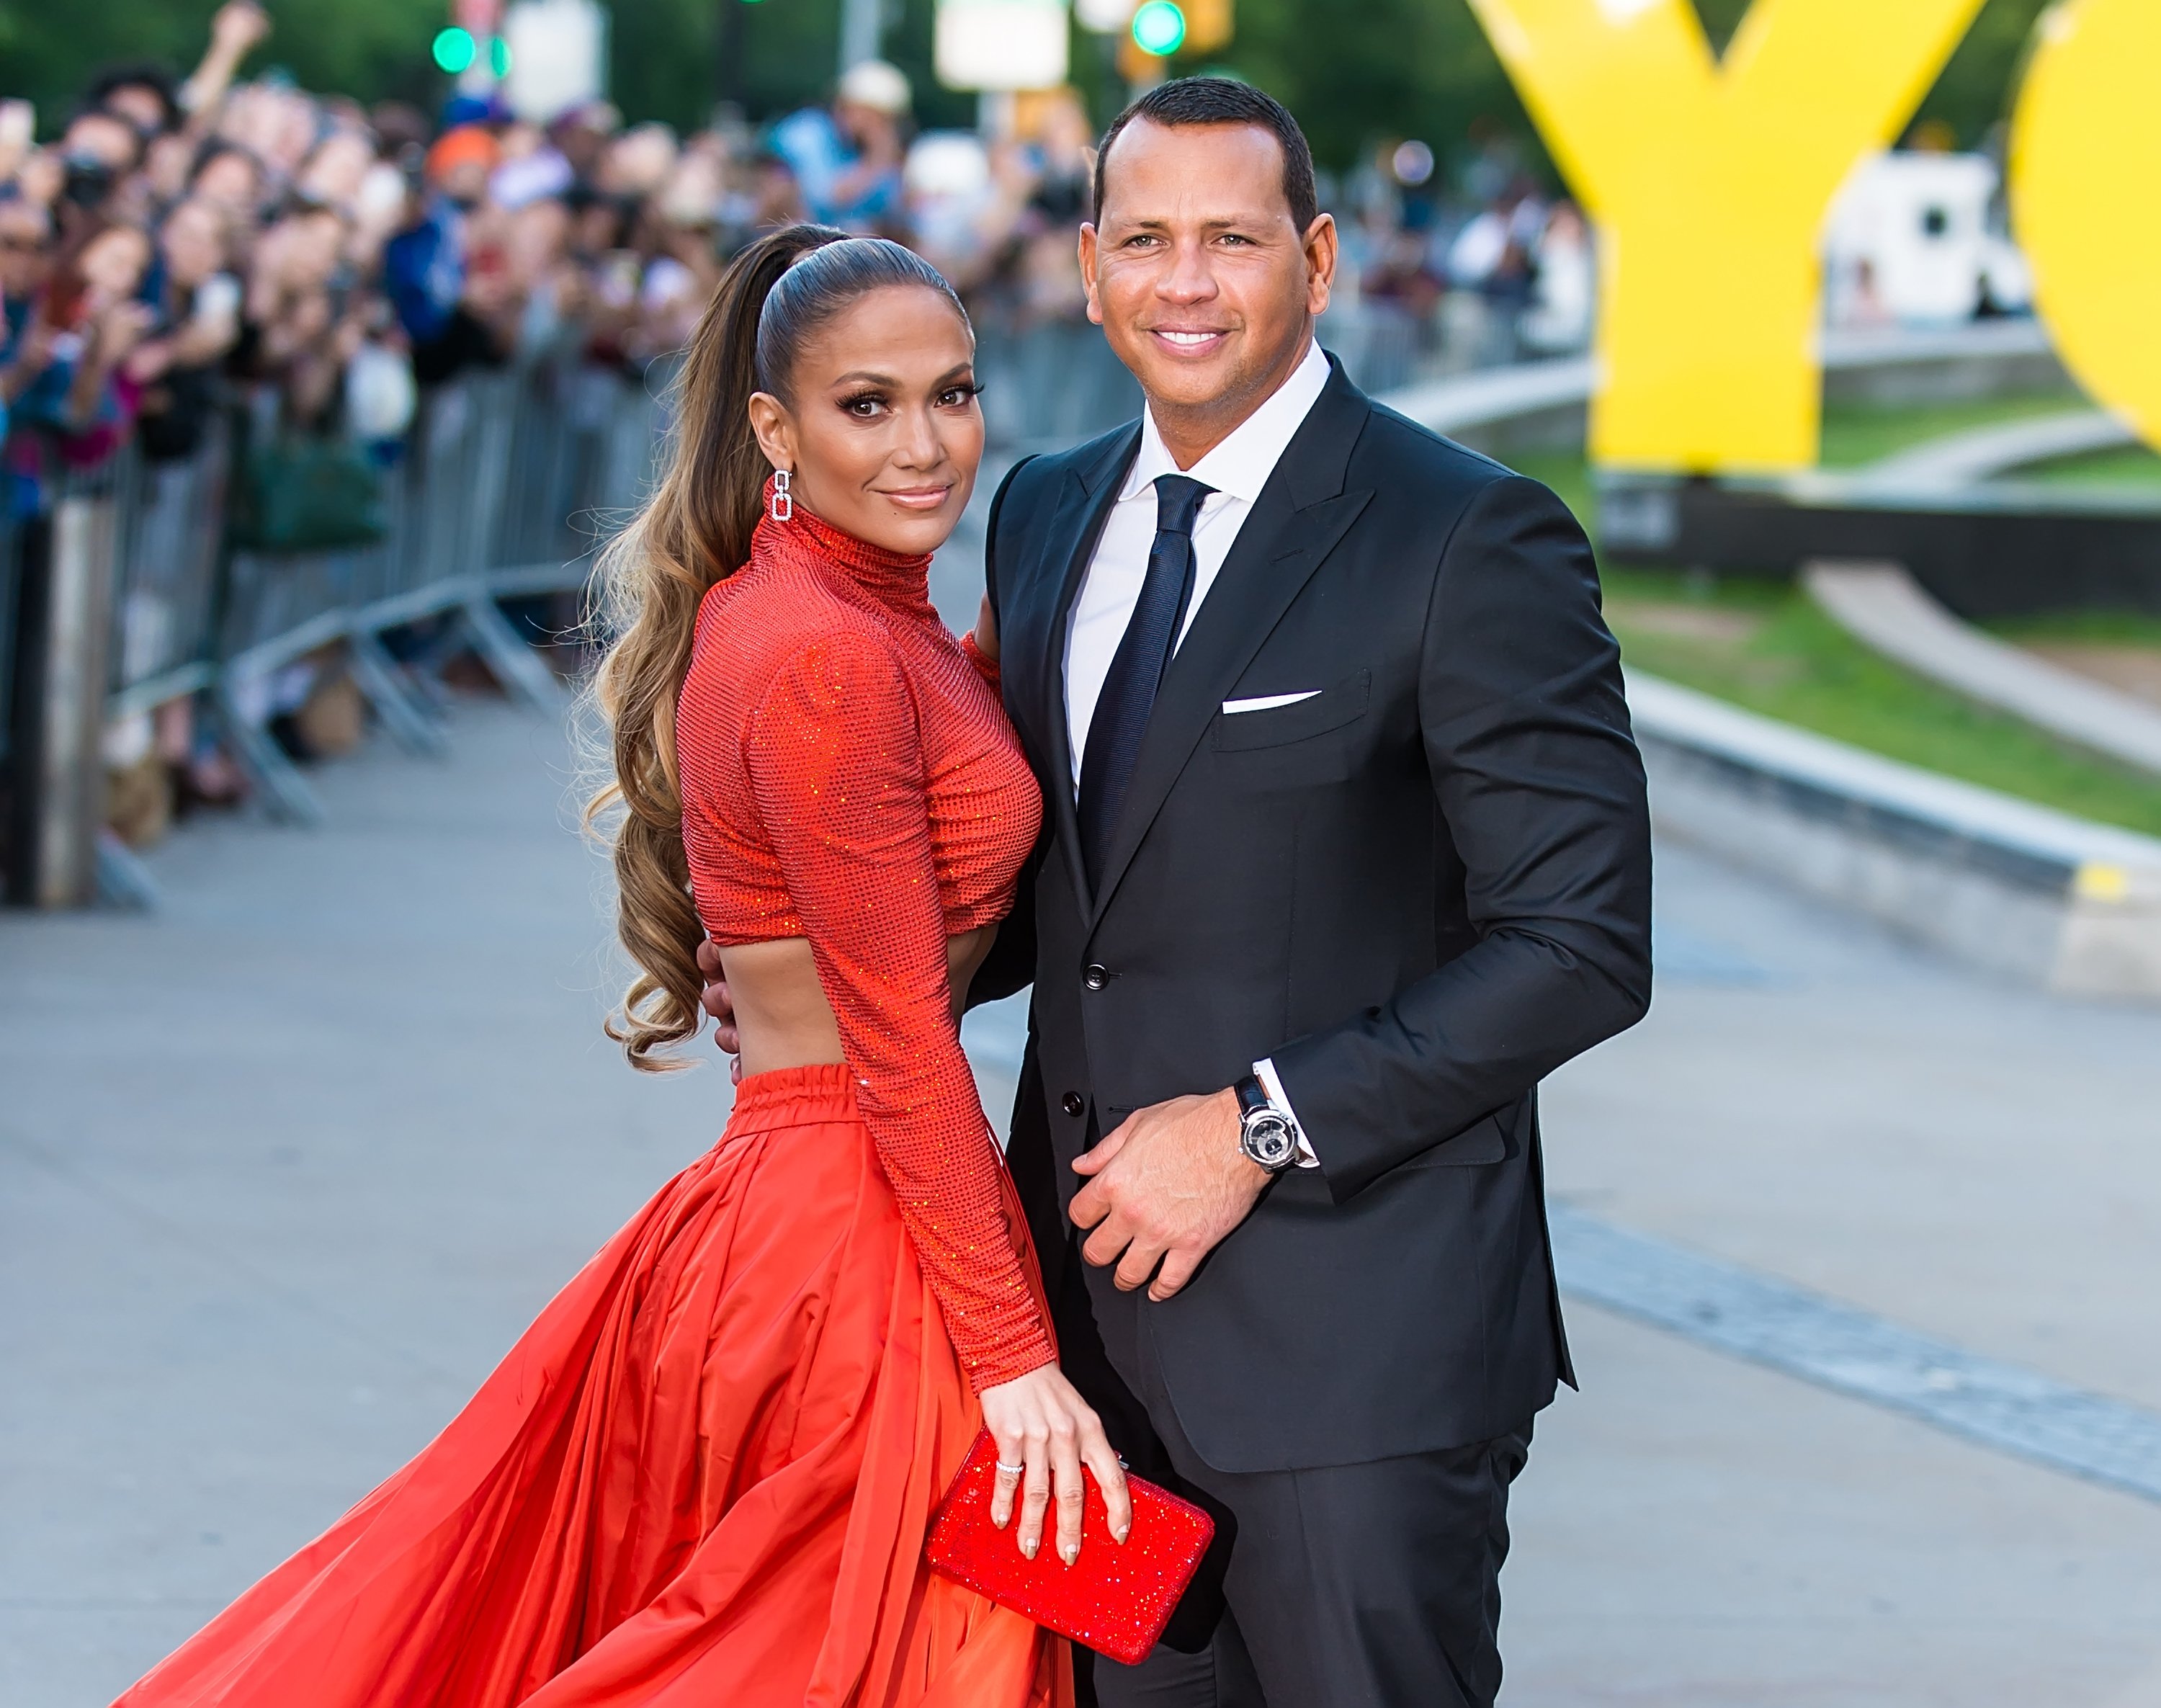 Jennifer Lopez and Alex Rodriguez pictured at the 2019 CFDA Fashion Awards. | Photo: Getty Images